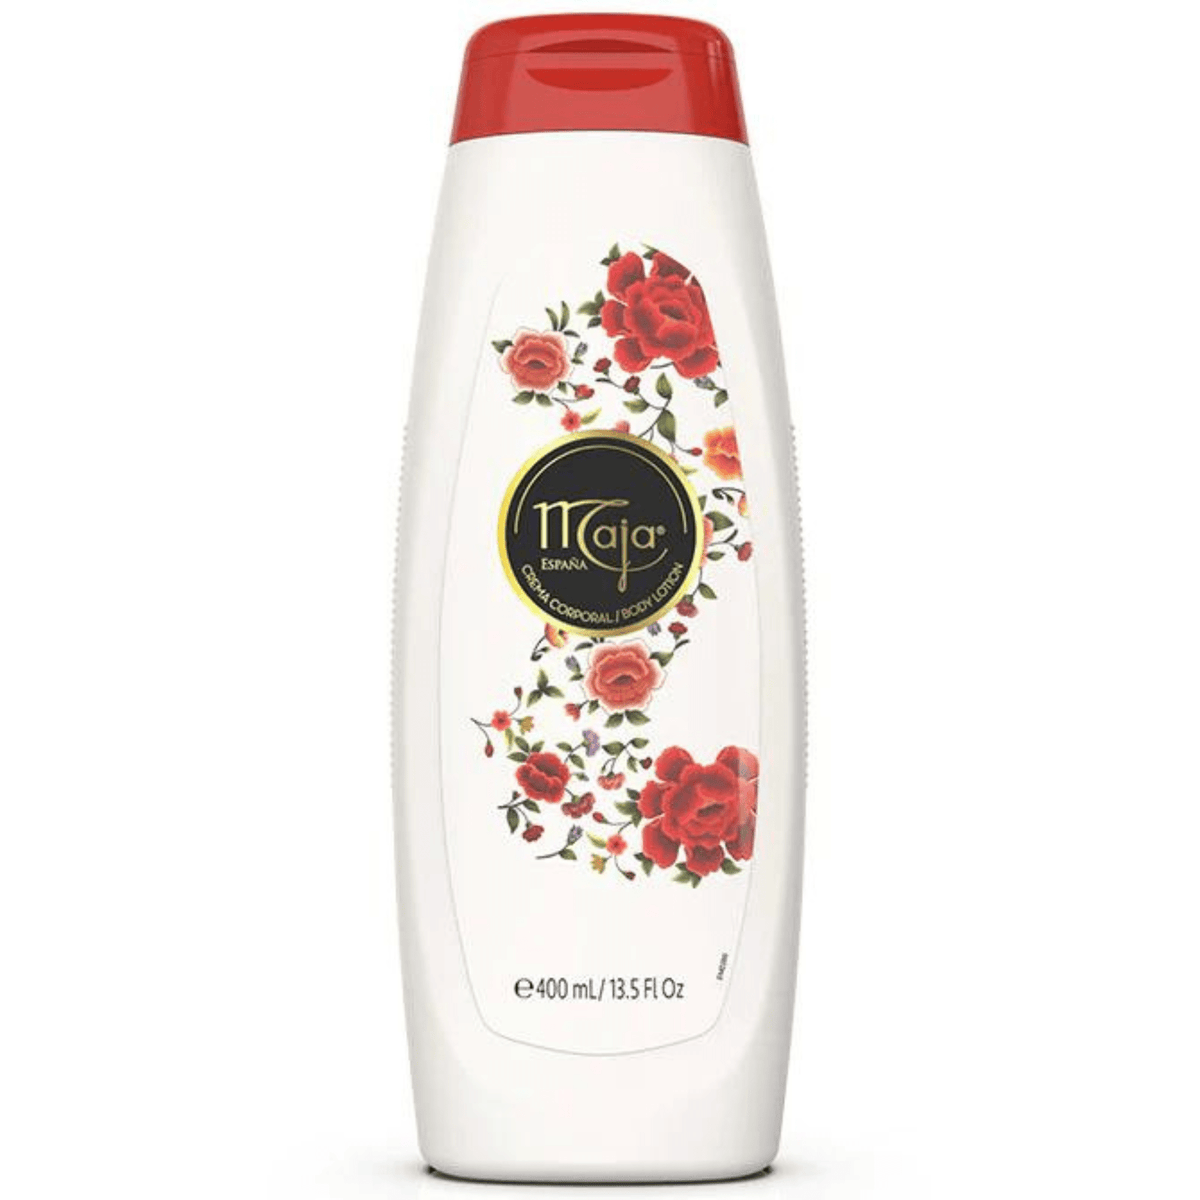 Primary Image of Perfumed Body Lotion